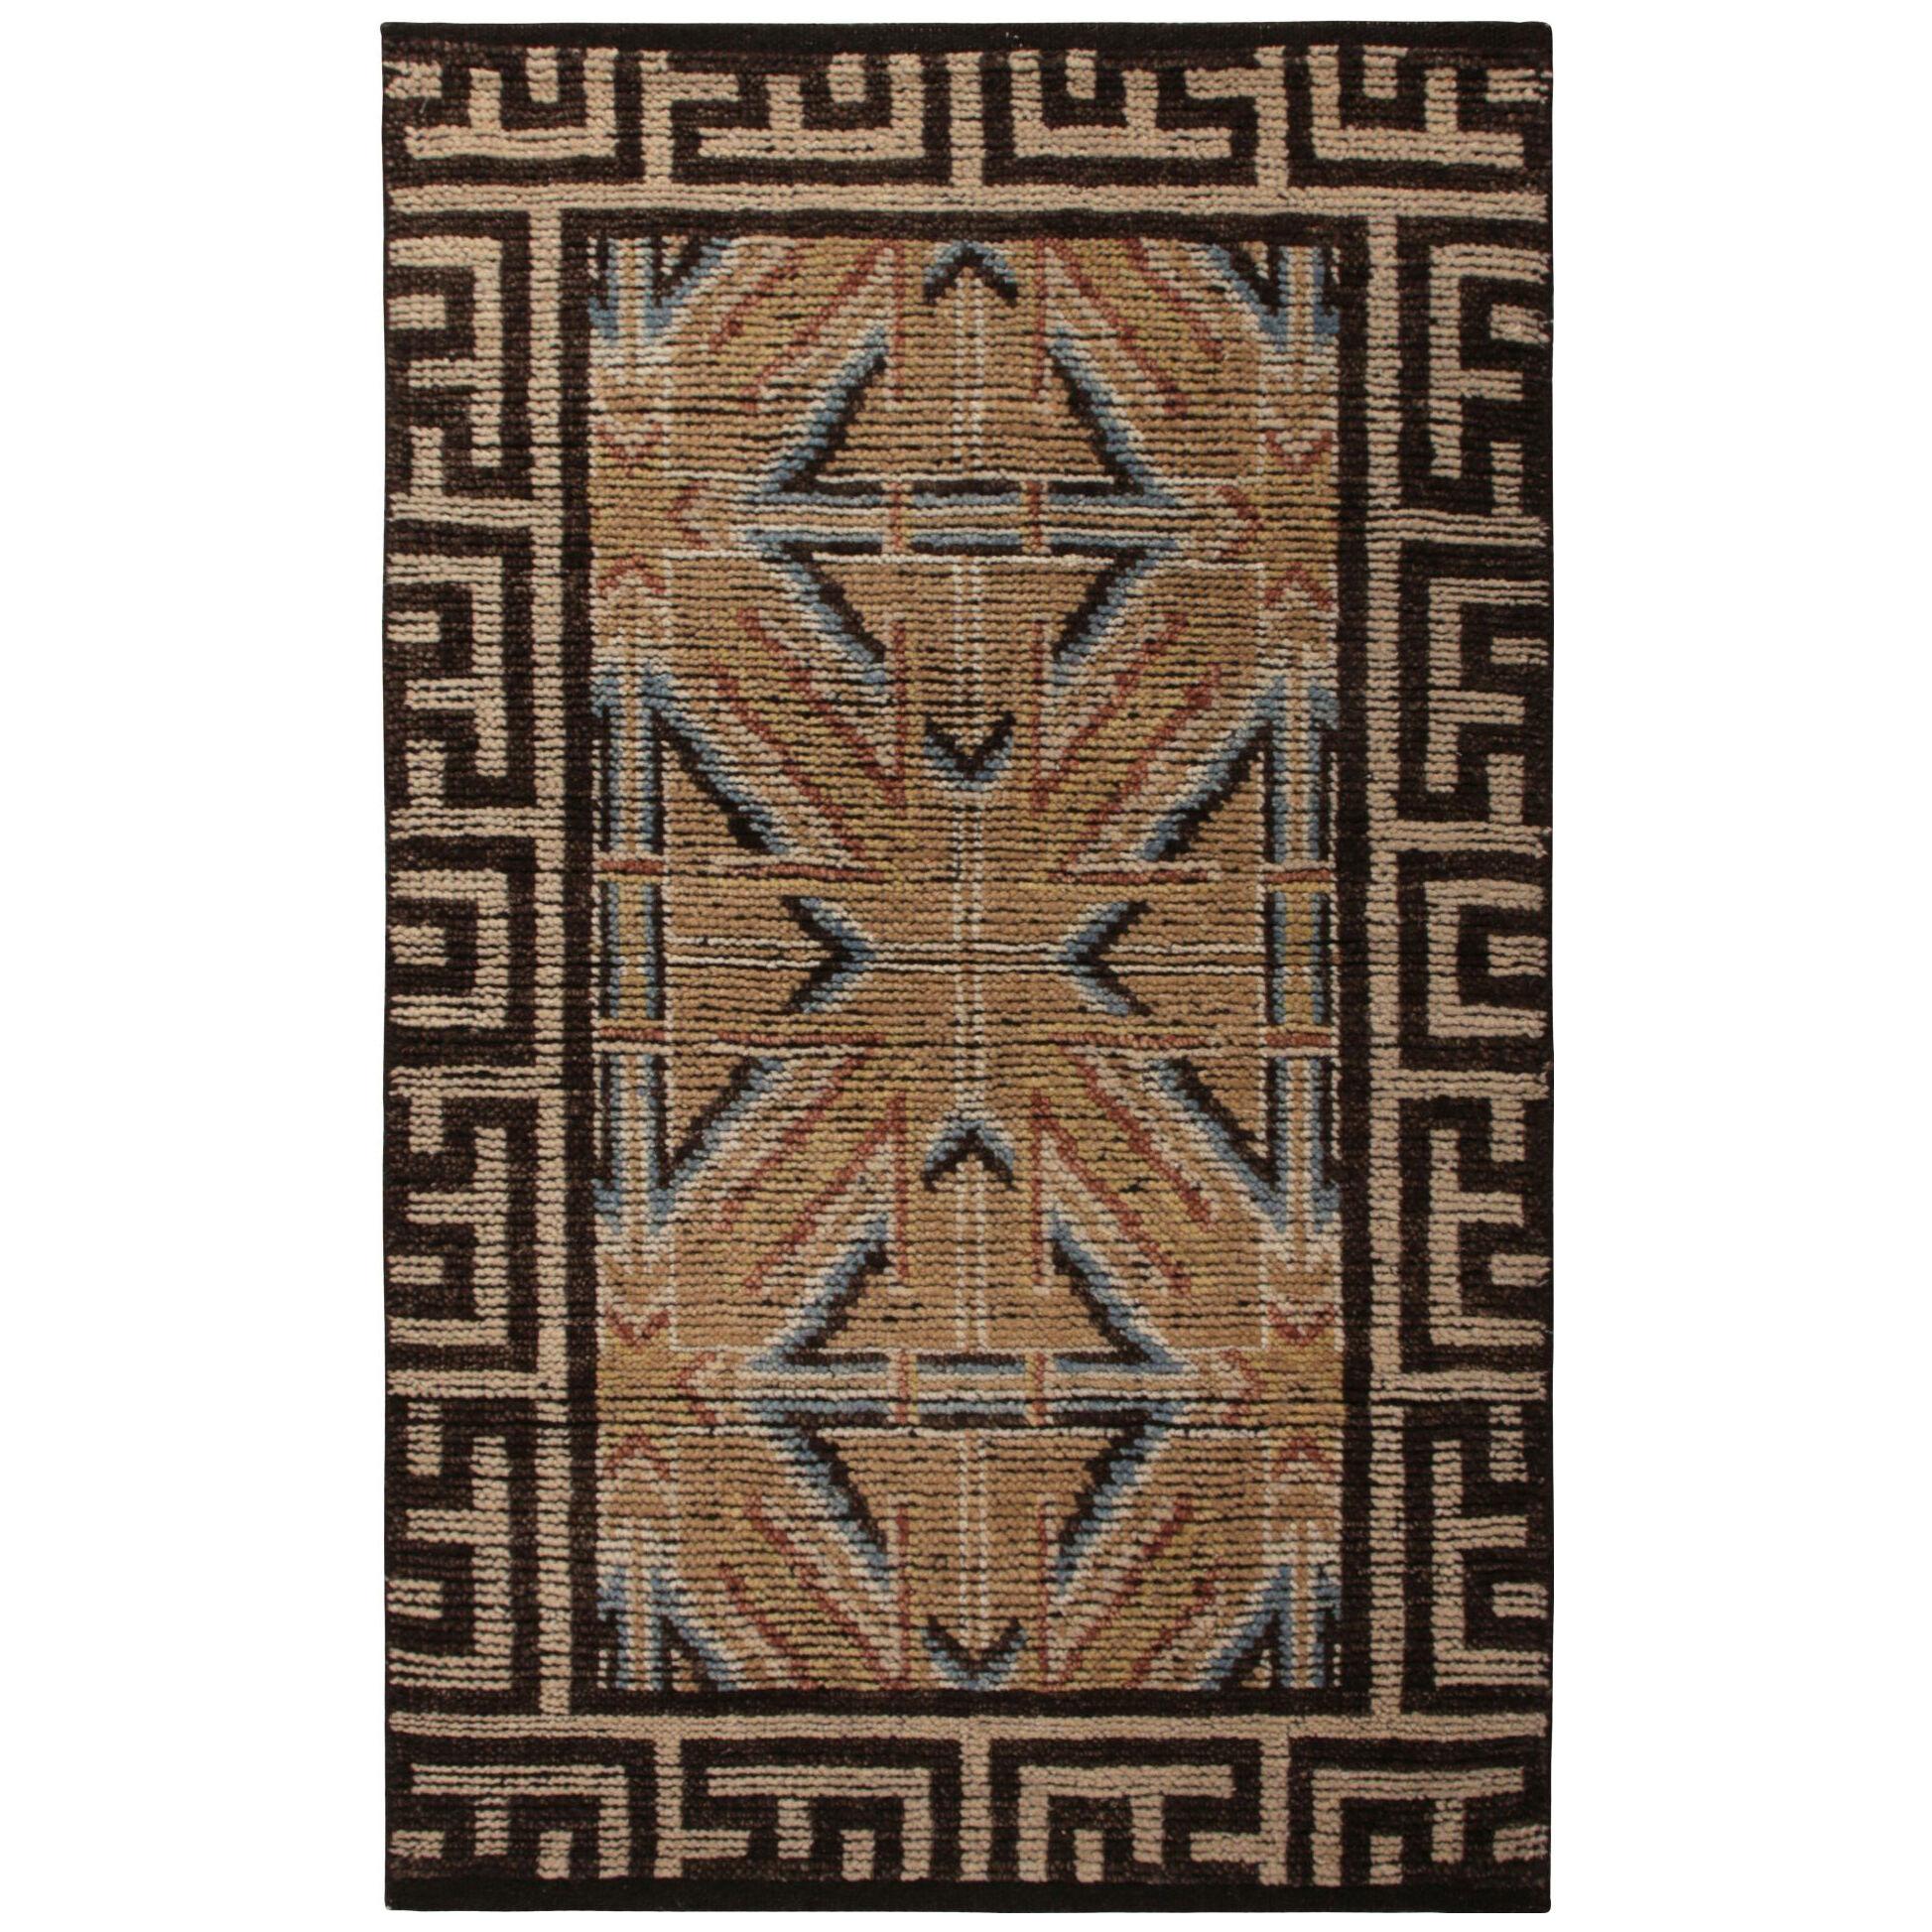 18th Century Chinese Style Rug in Beige Brown Geometric Pattern by Rug & Kilim